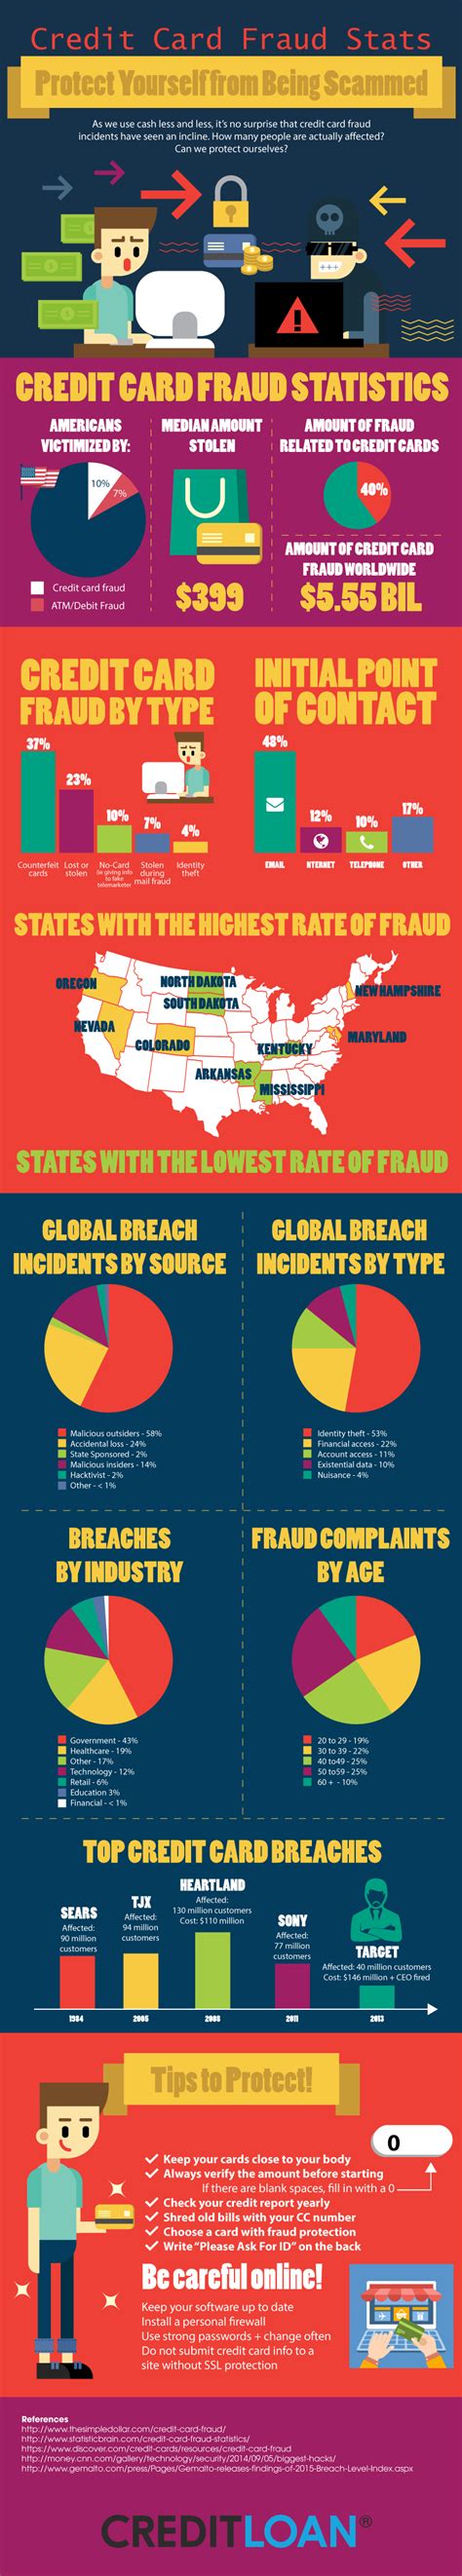 They want personal information, bank account or credit card so they can process your temporary card. Credit Card Fraud Stats - Protect Yourself from Being Scammed - SavingAdvice.com Blog